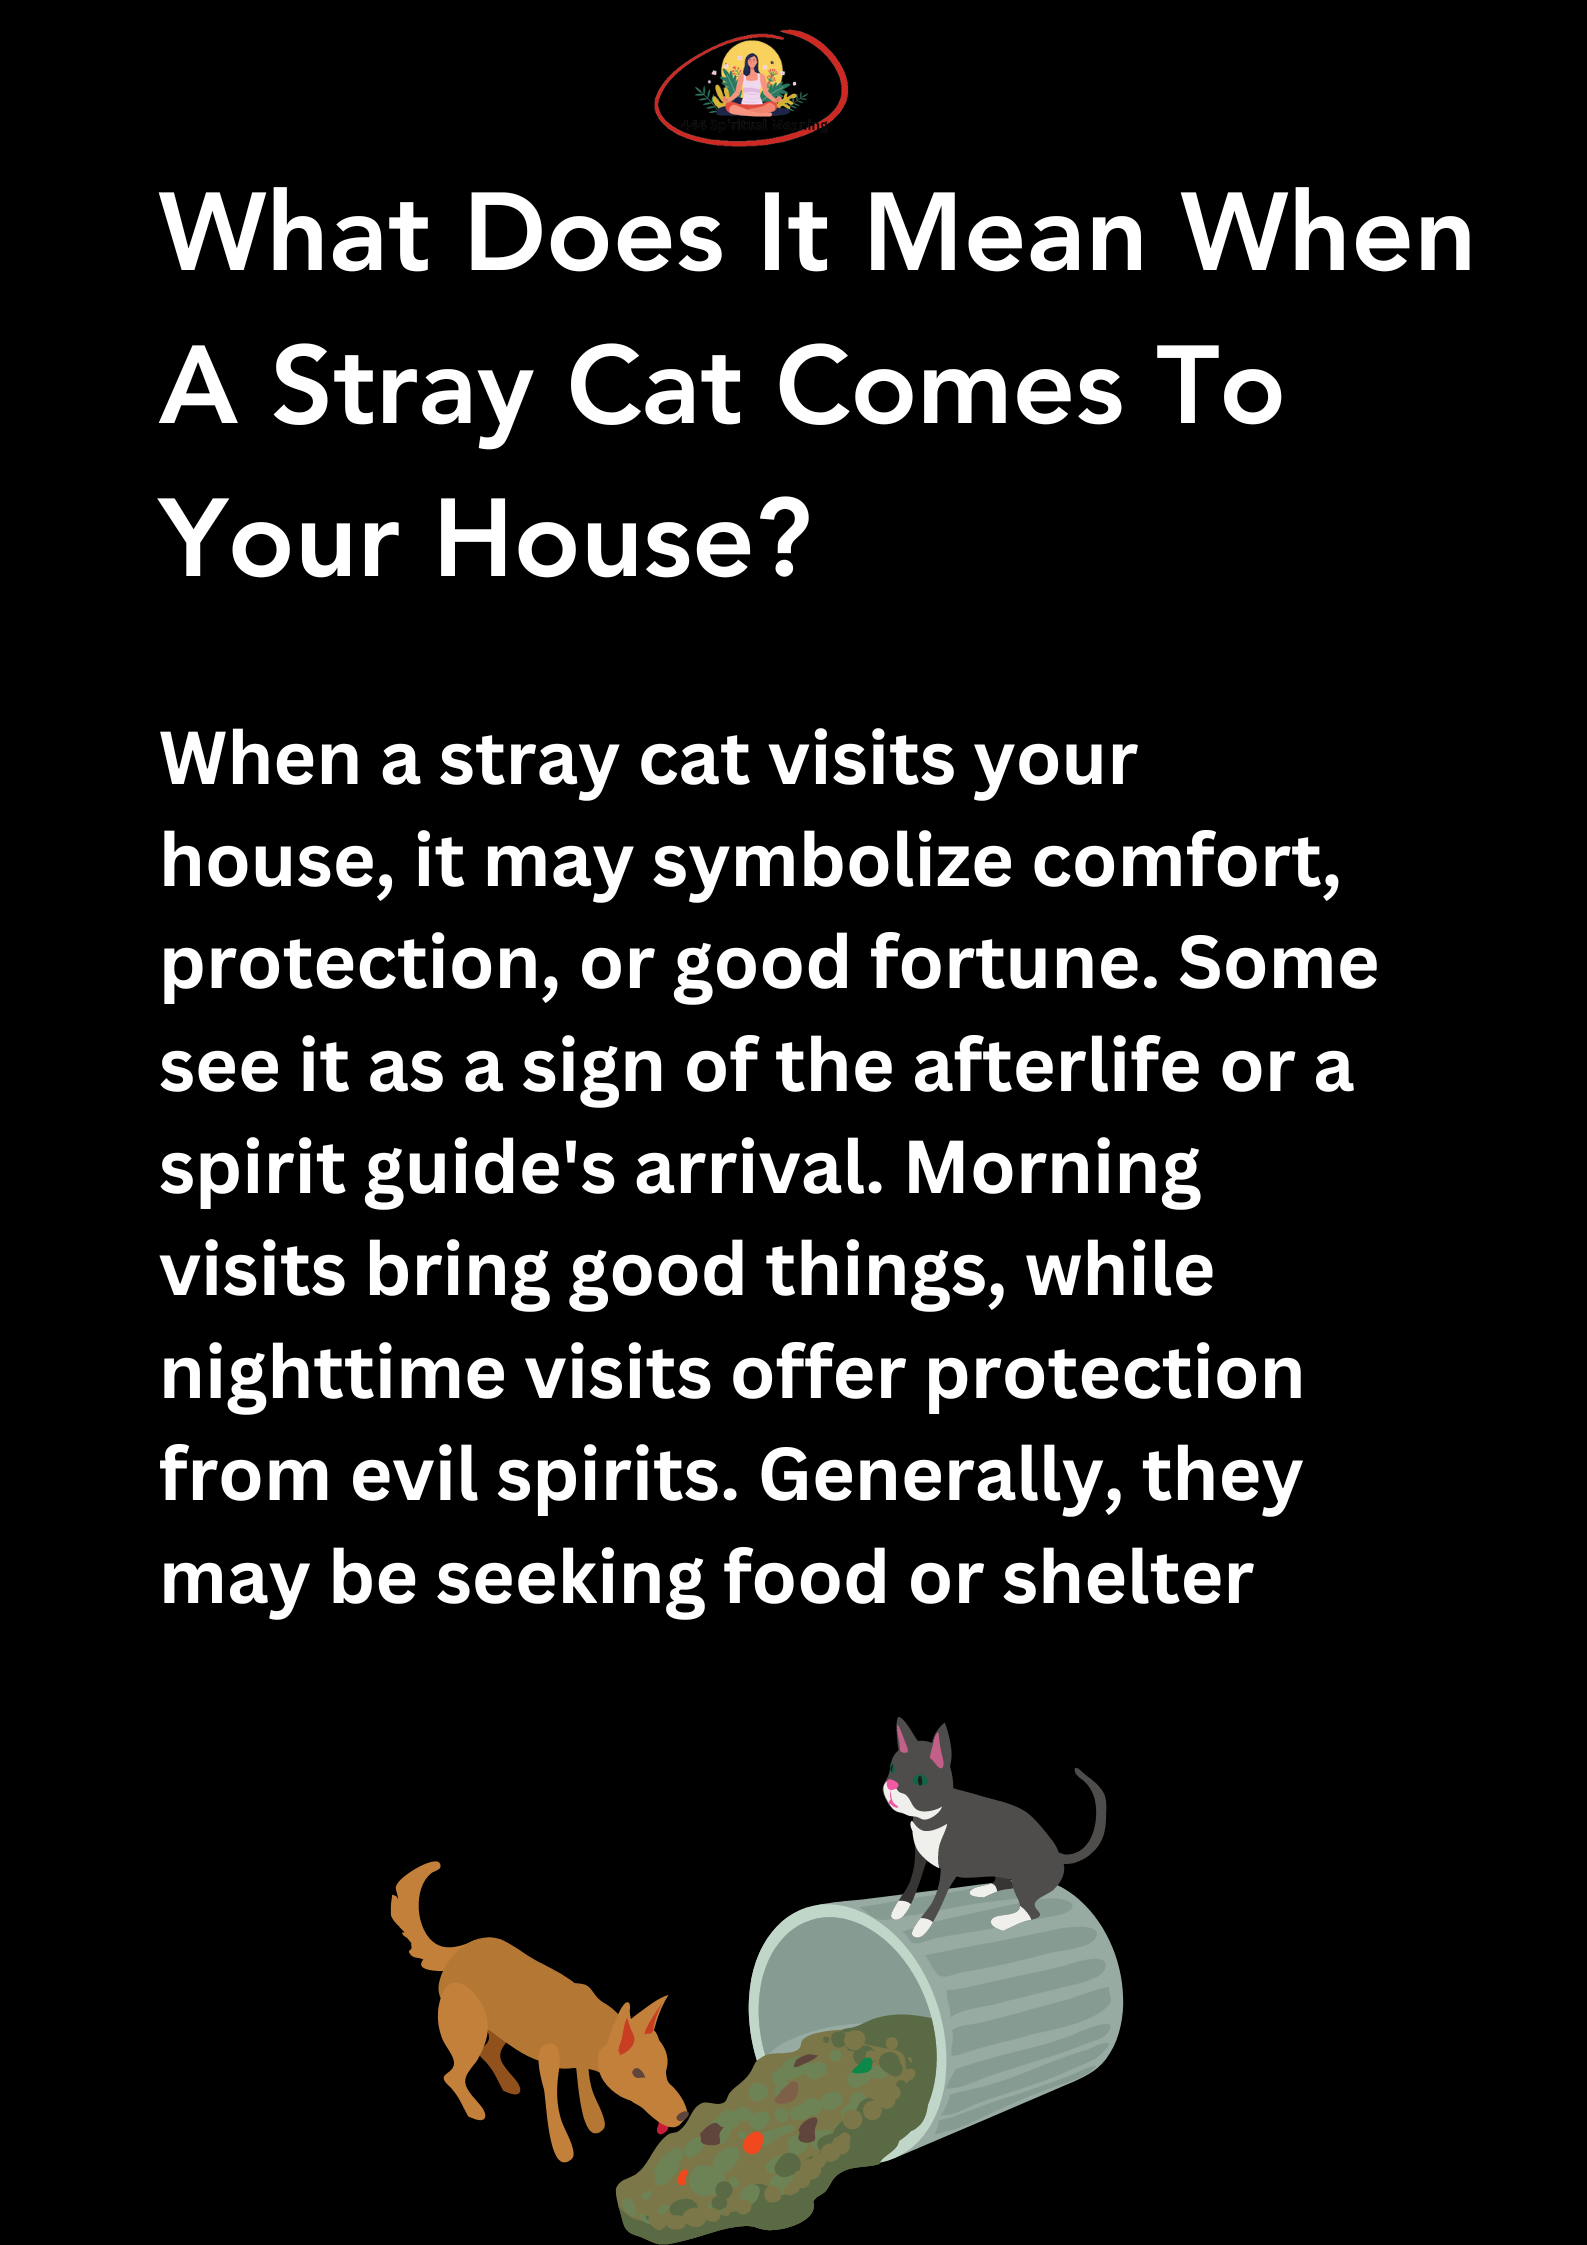 What Does It Mean When A Stray Cat Comes To Your House? 